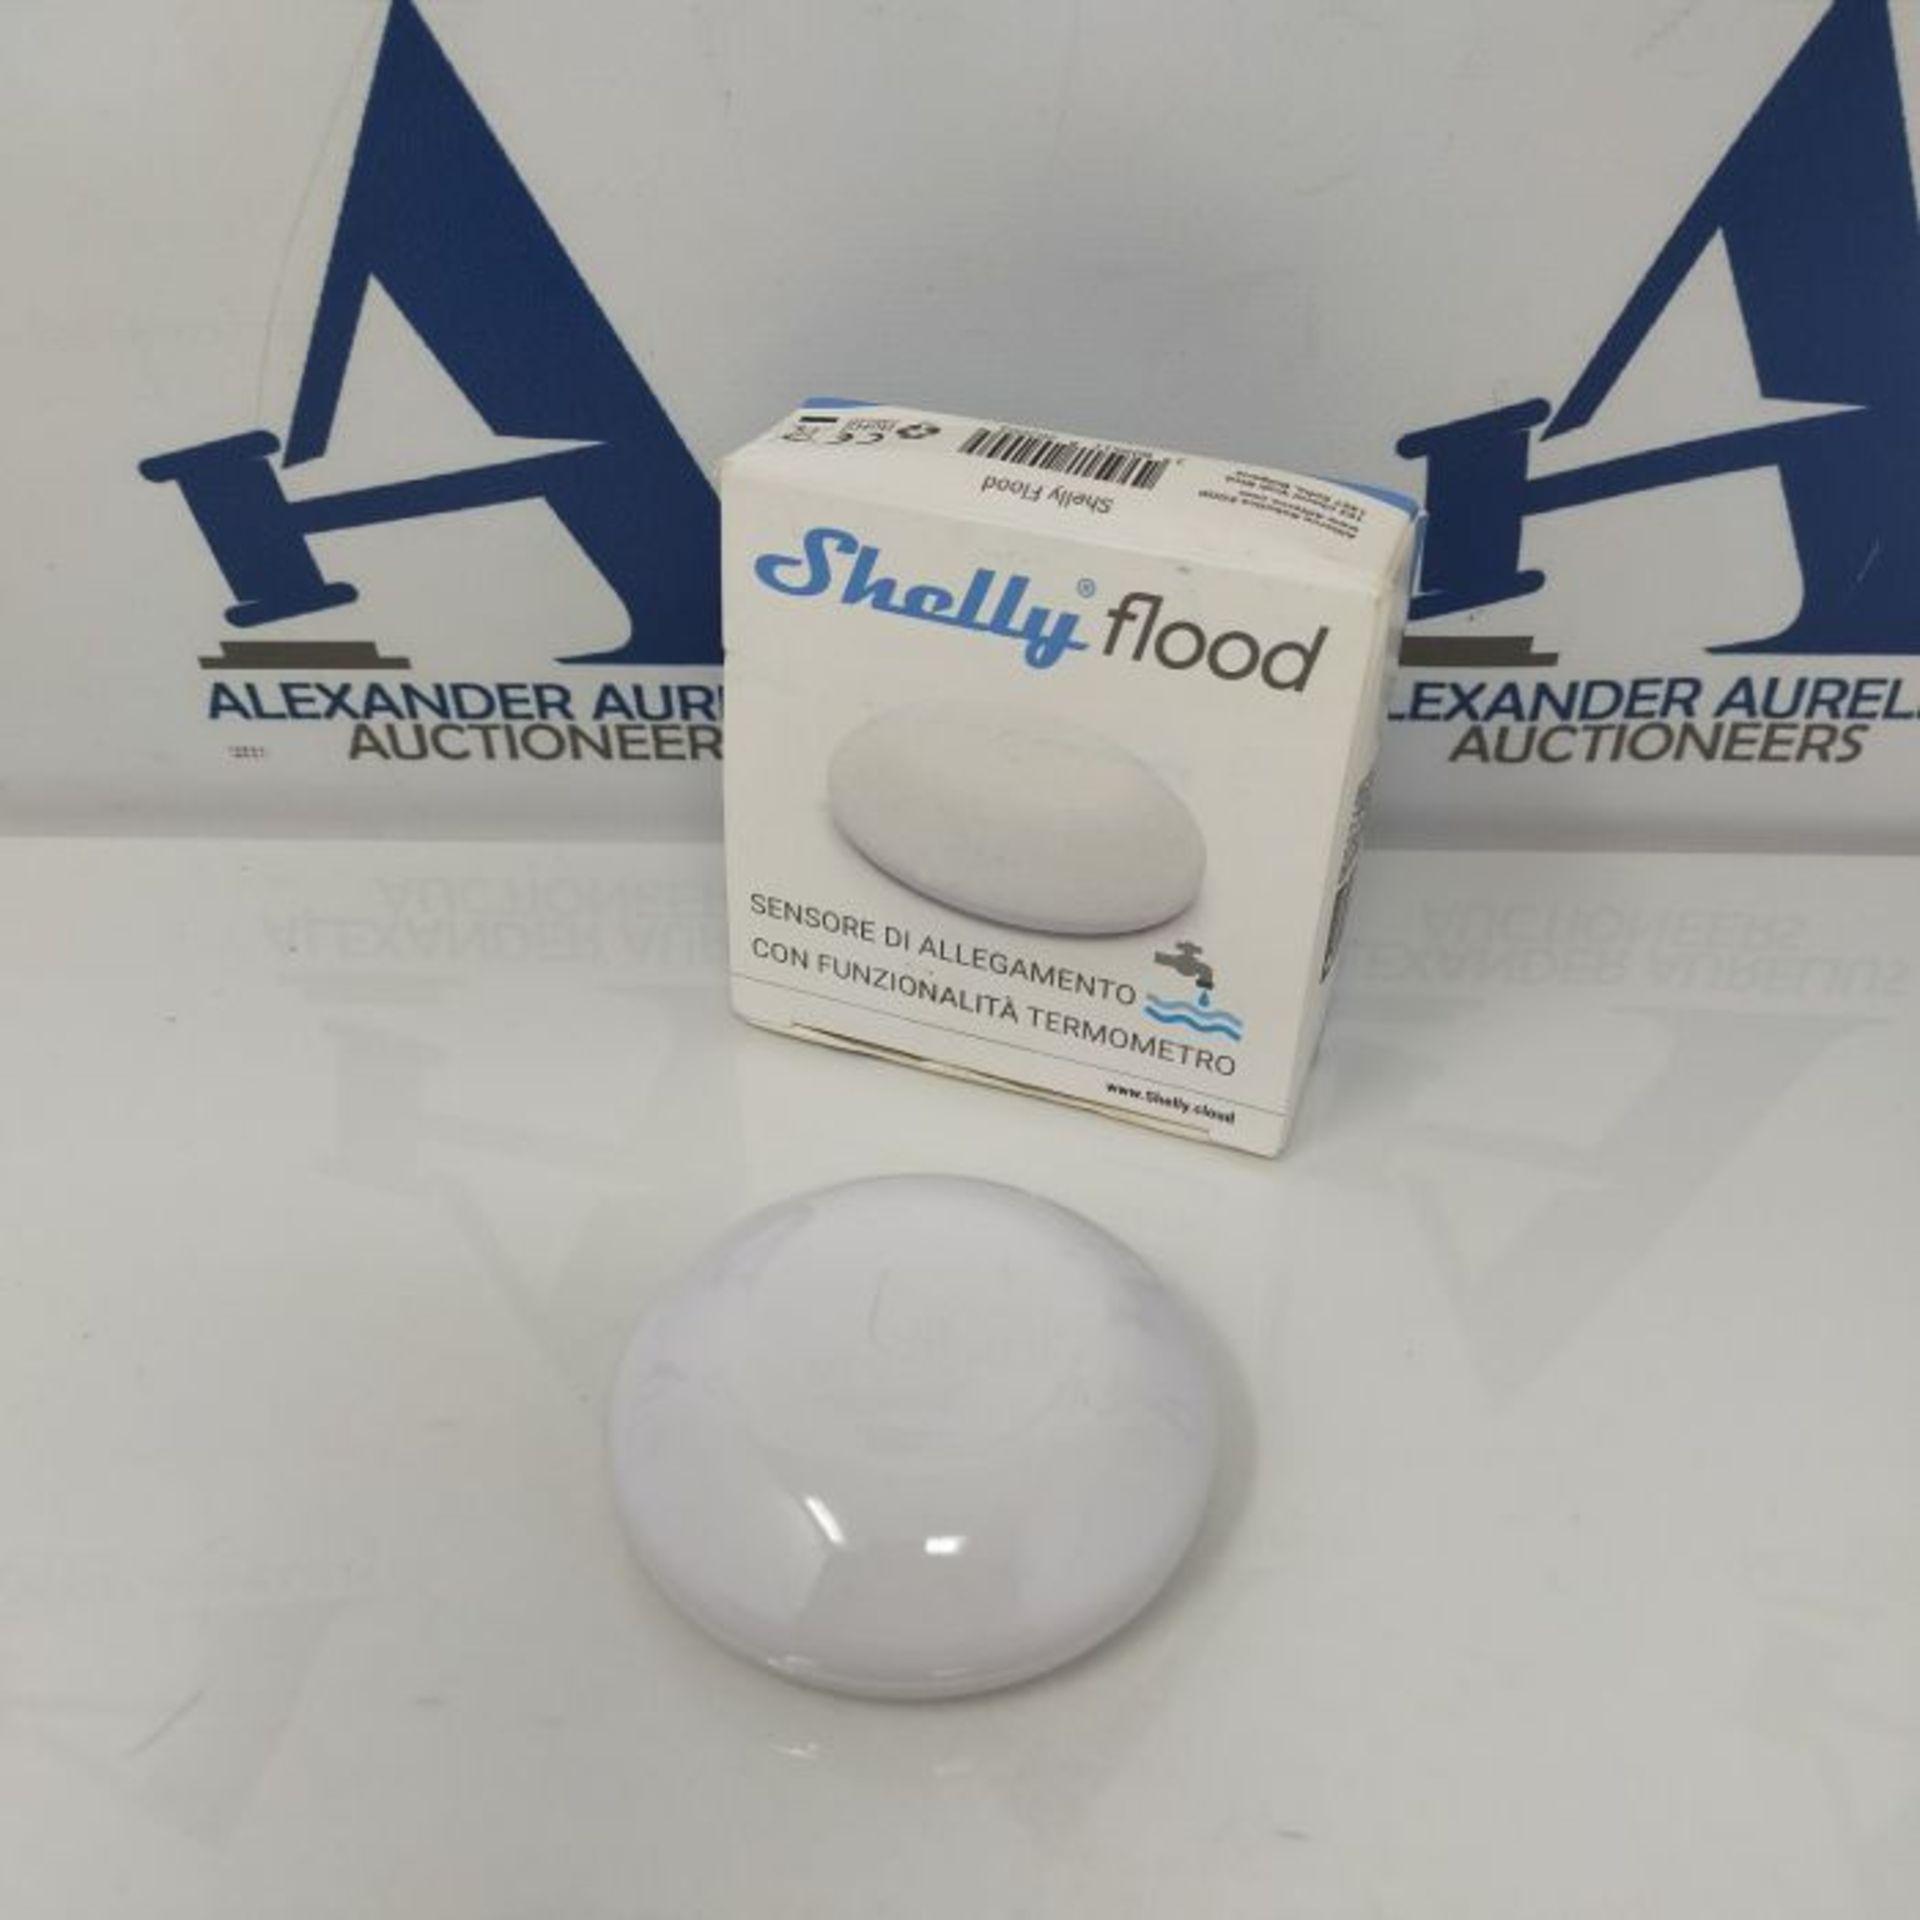 Shelly Flood Wireless Flood Sensor with Temperature Measurement, Drip and Leak Alarm,